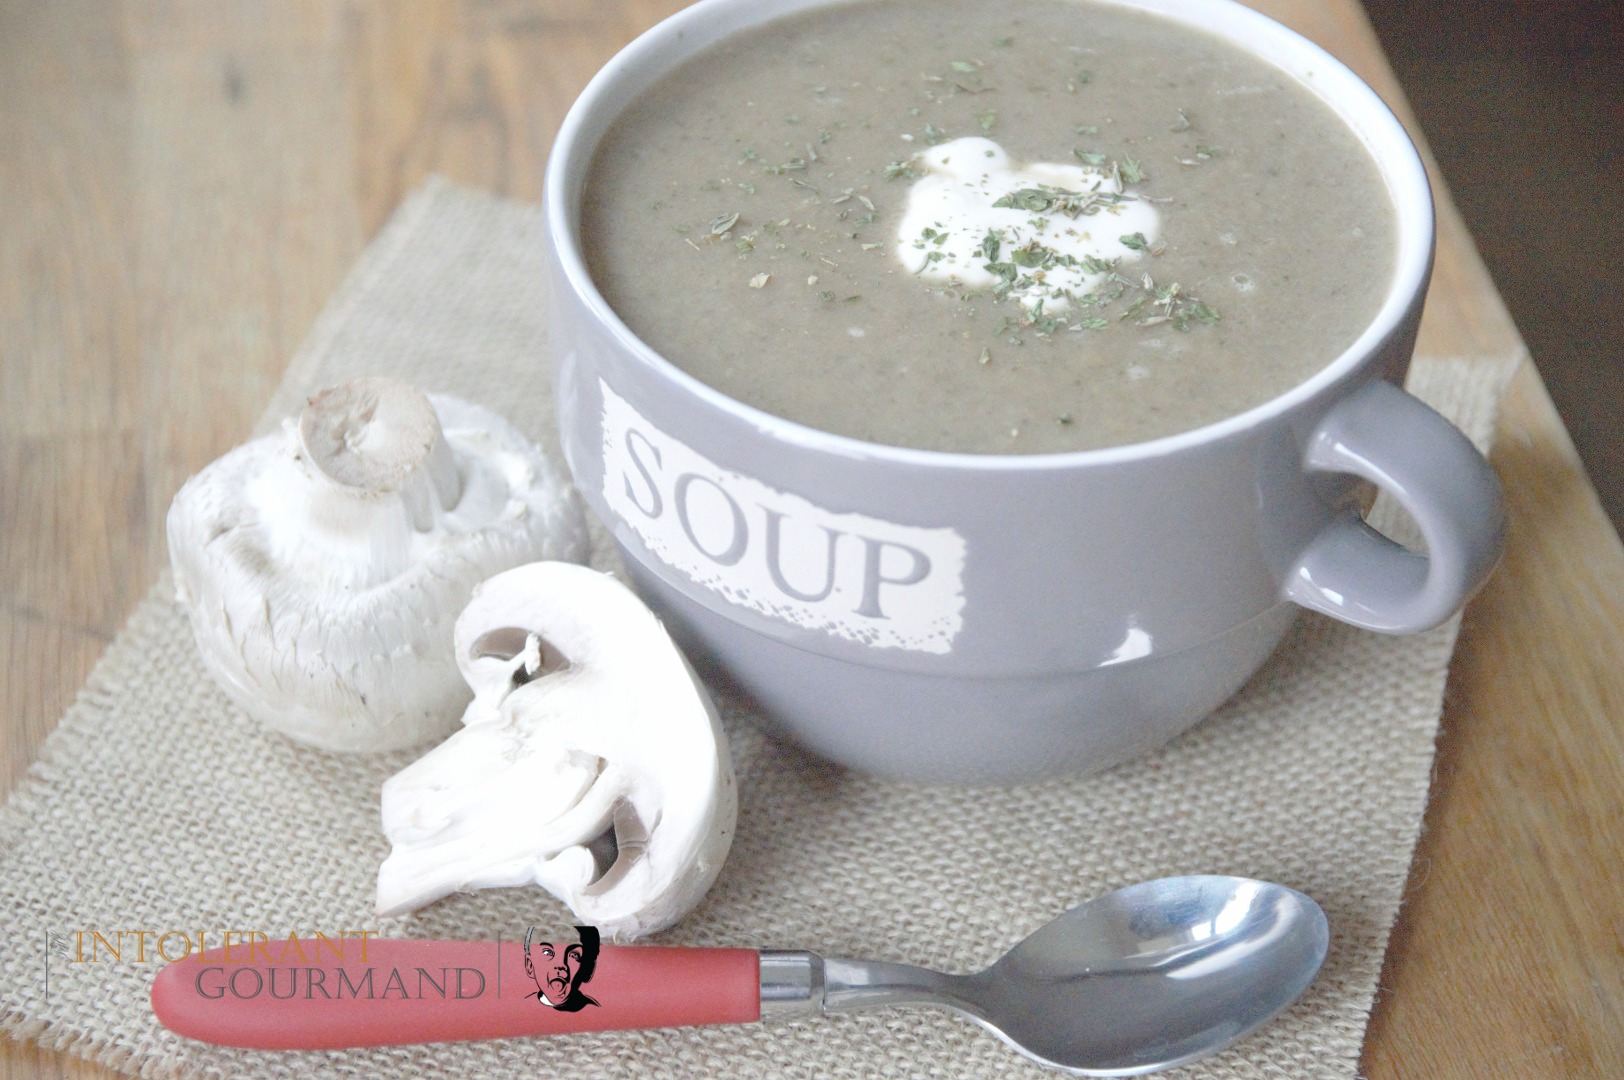 Free from mushroom soup - naturally dairy-free, wheat-free, gluten-free, and suitable for vegans. A deliciously hearty and healthy soup, packed full of nutrients, and quick to make too! www.intolerantgourmand.com